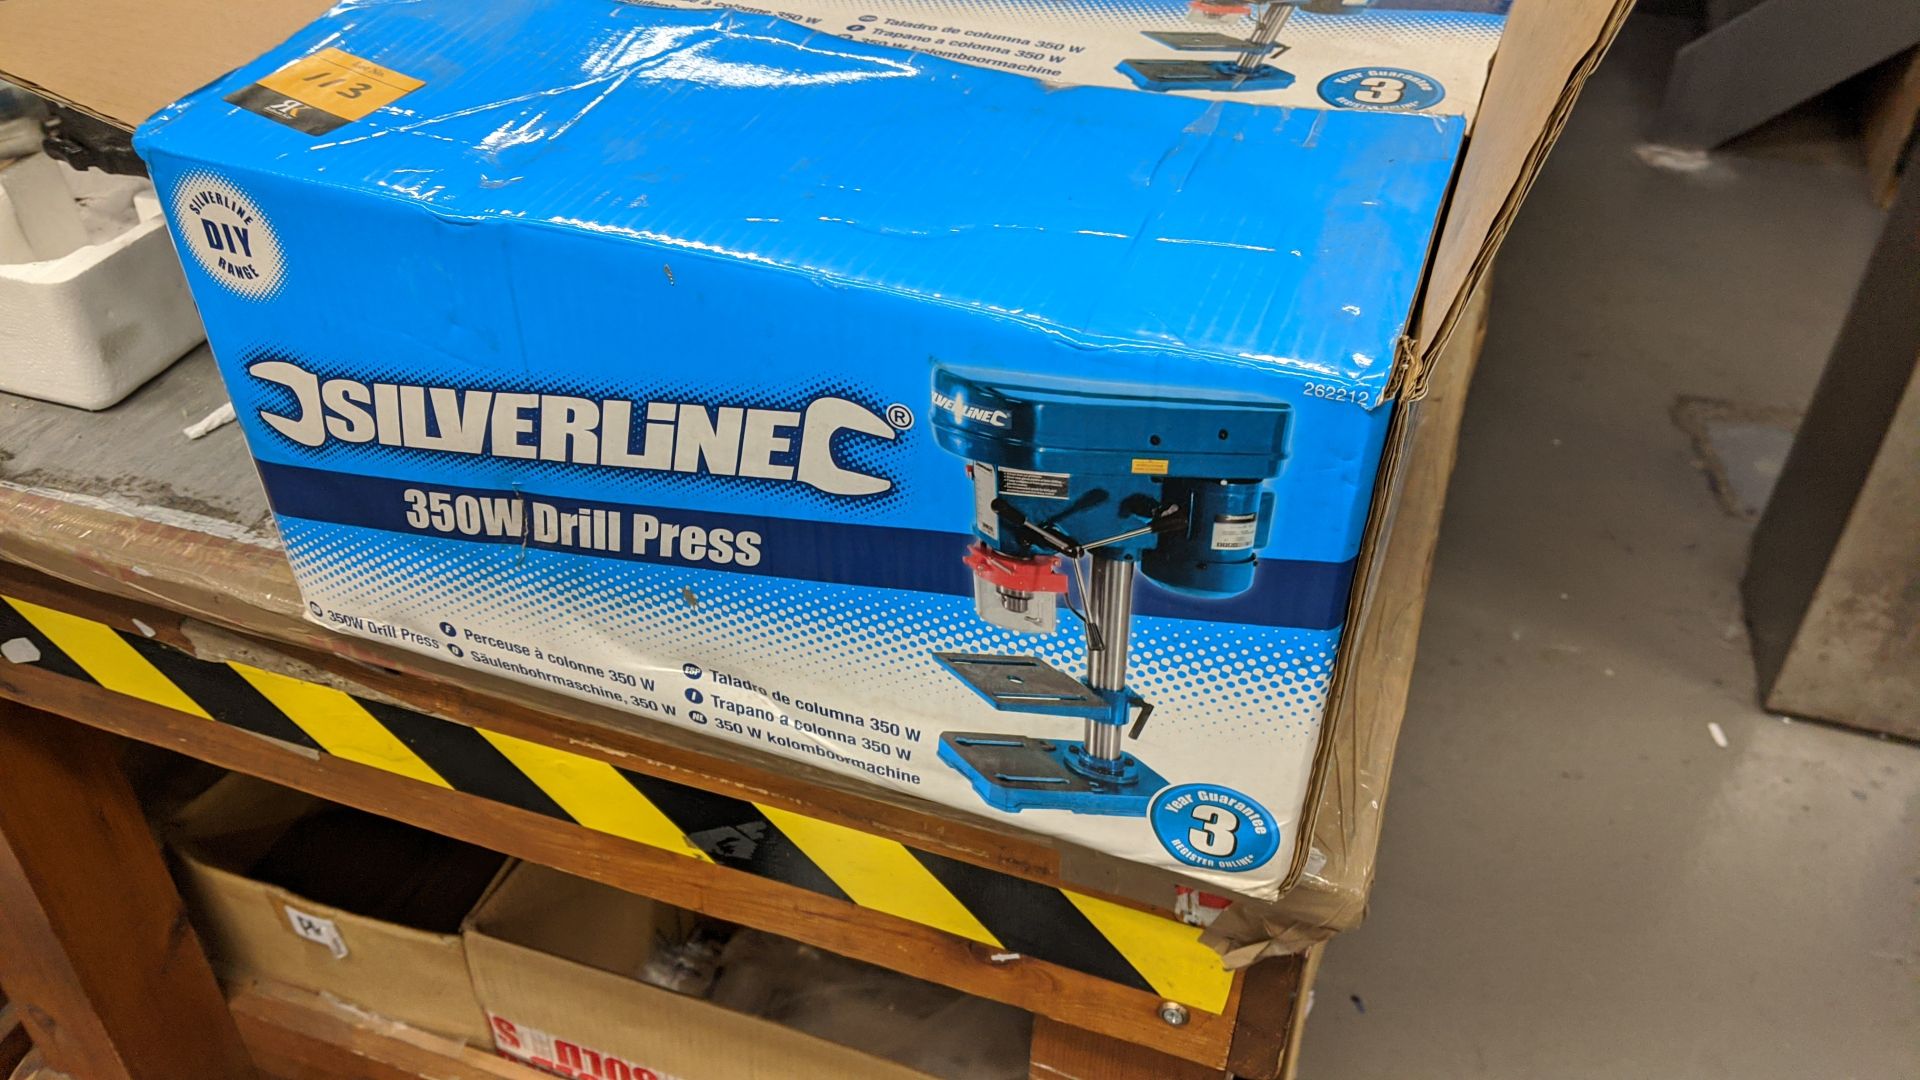 Silverline 350W drill press - appears unused Please note, lots 1 - 200 are located at Samson - Image 3 of 9